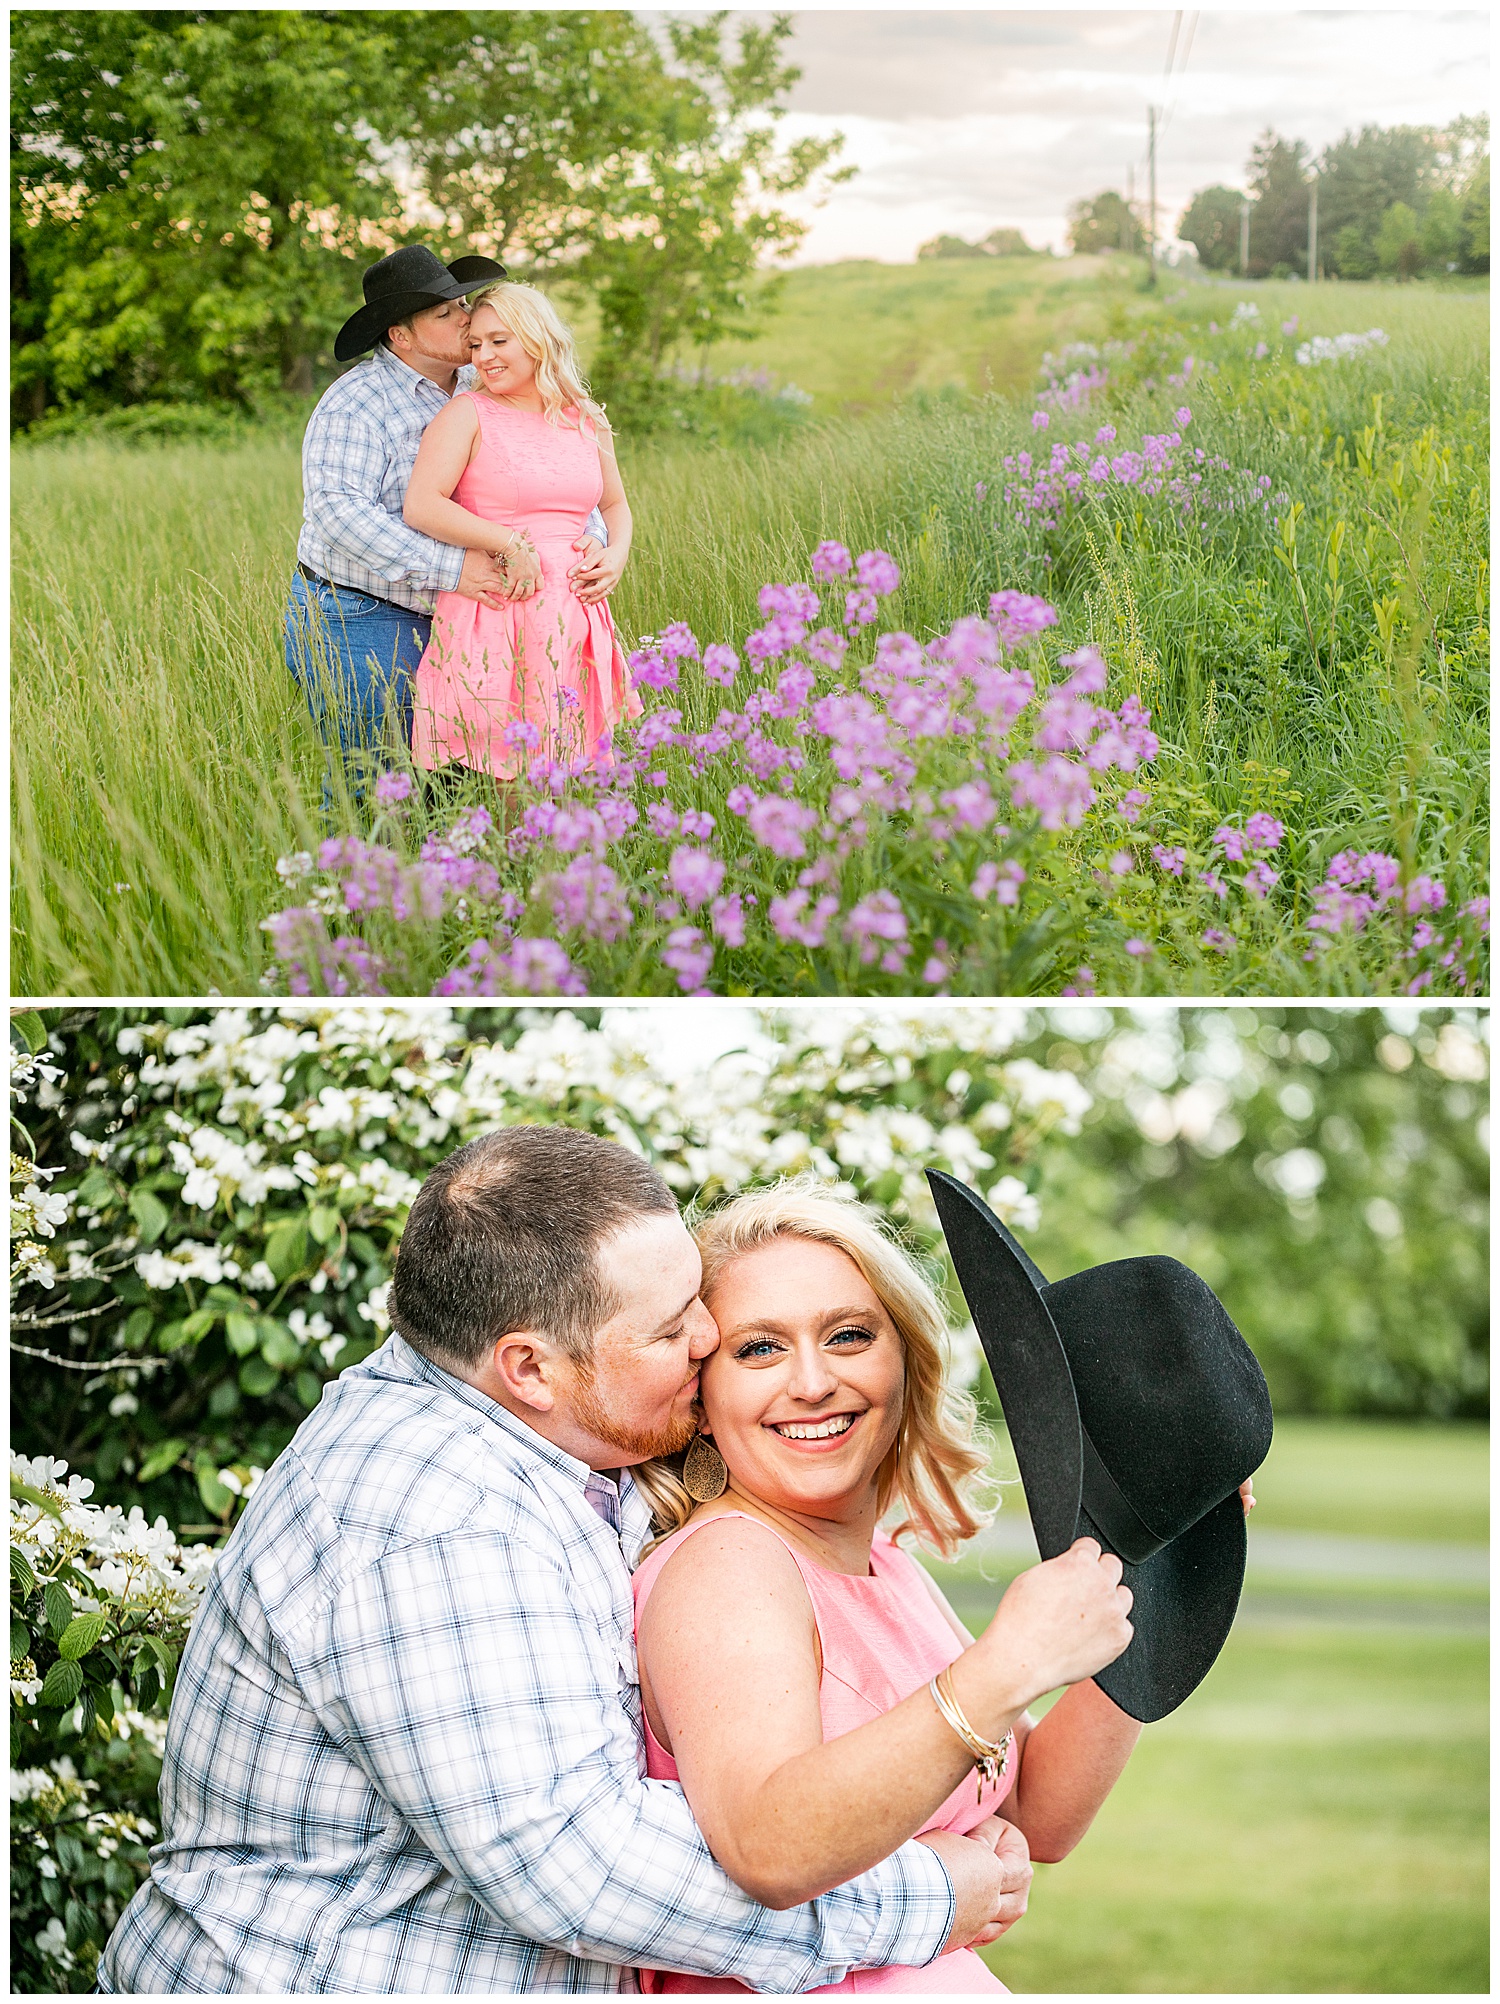 Kaitlin Justin Frederick Country Rainy Engagement Session Living Radiant Photography_0023.jpg